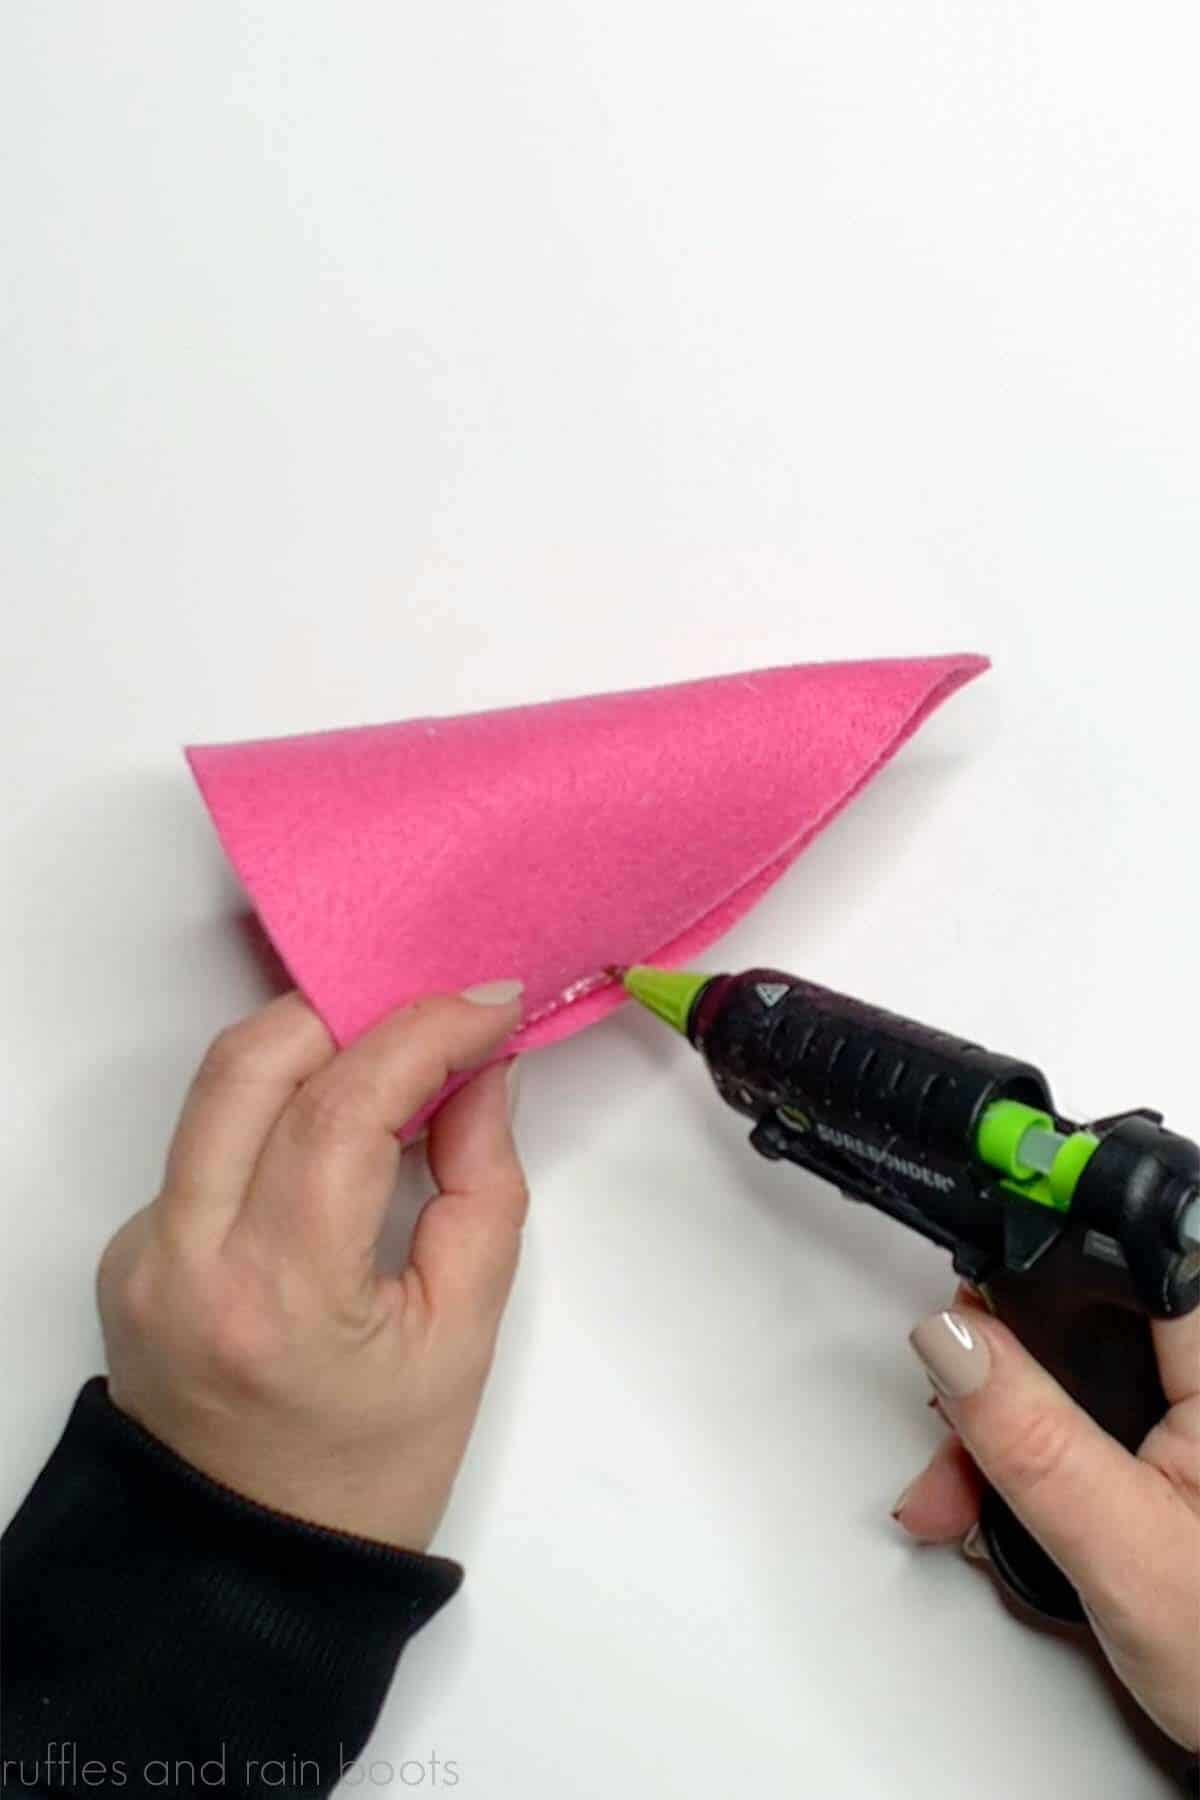 Crafter using a detail tip hot glue gun to create a pink gnome hat.